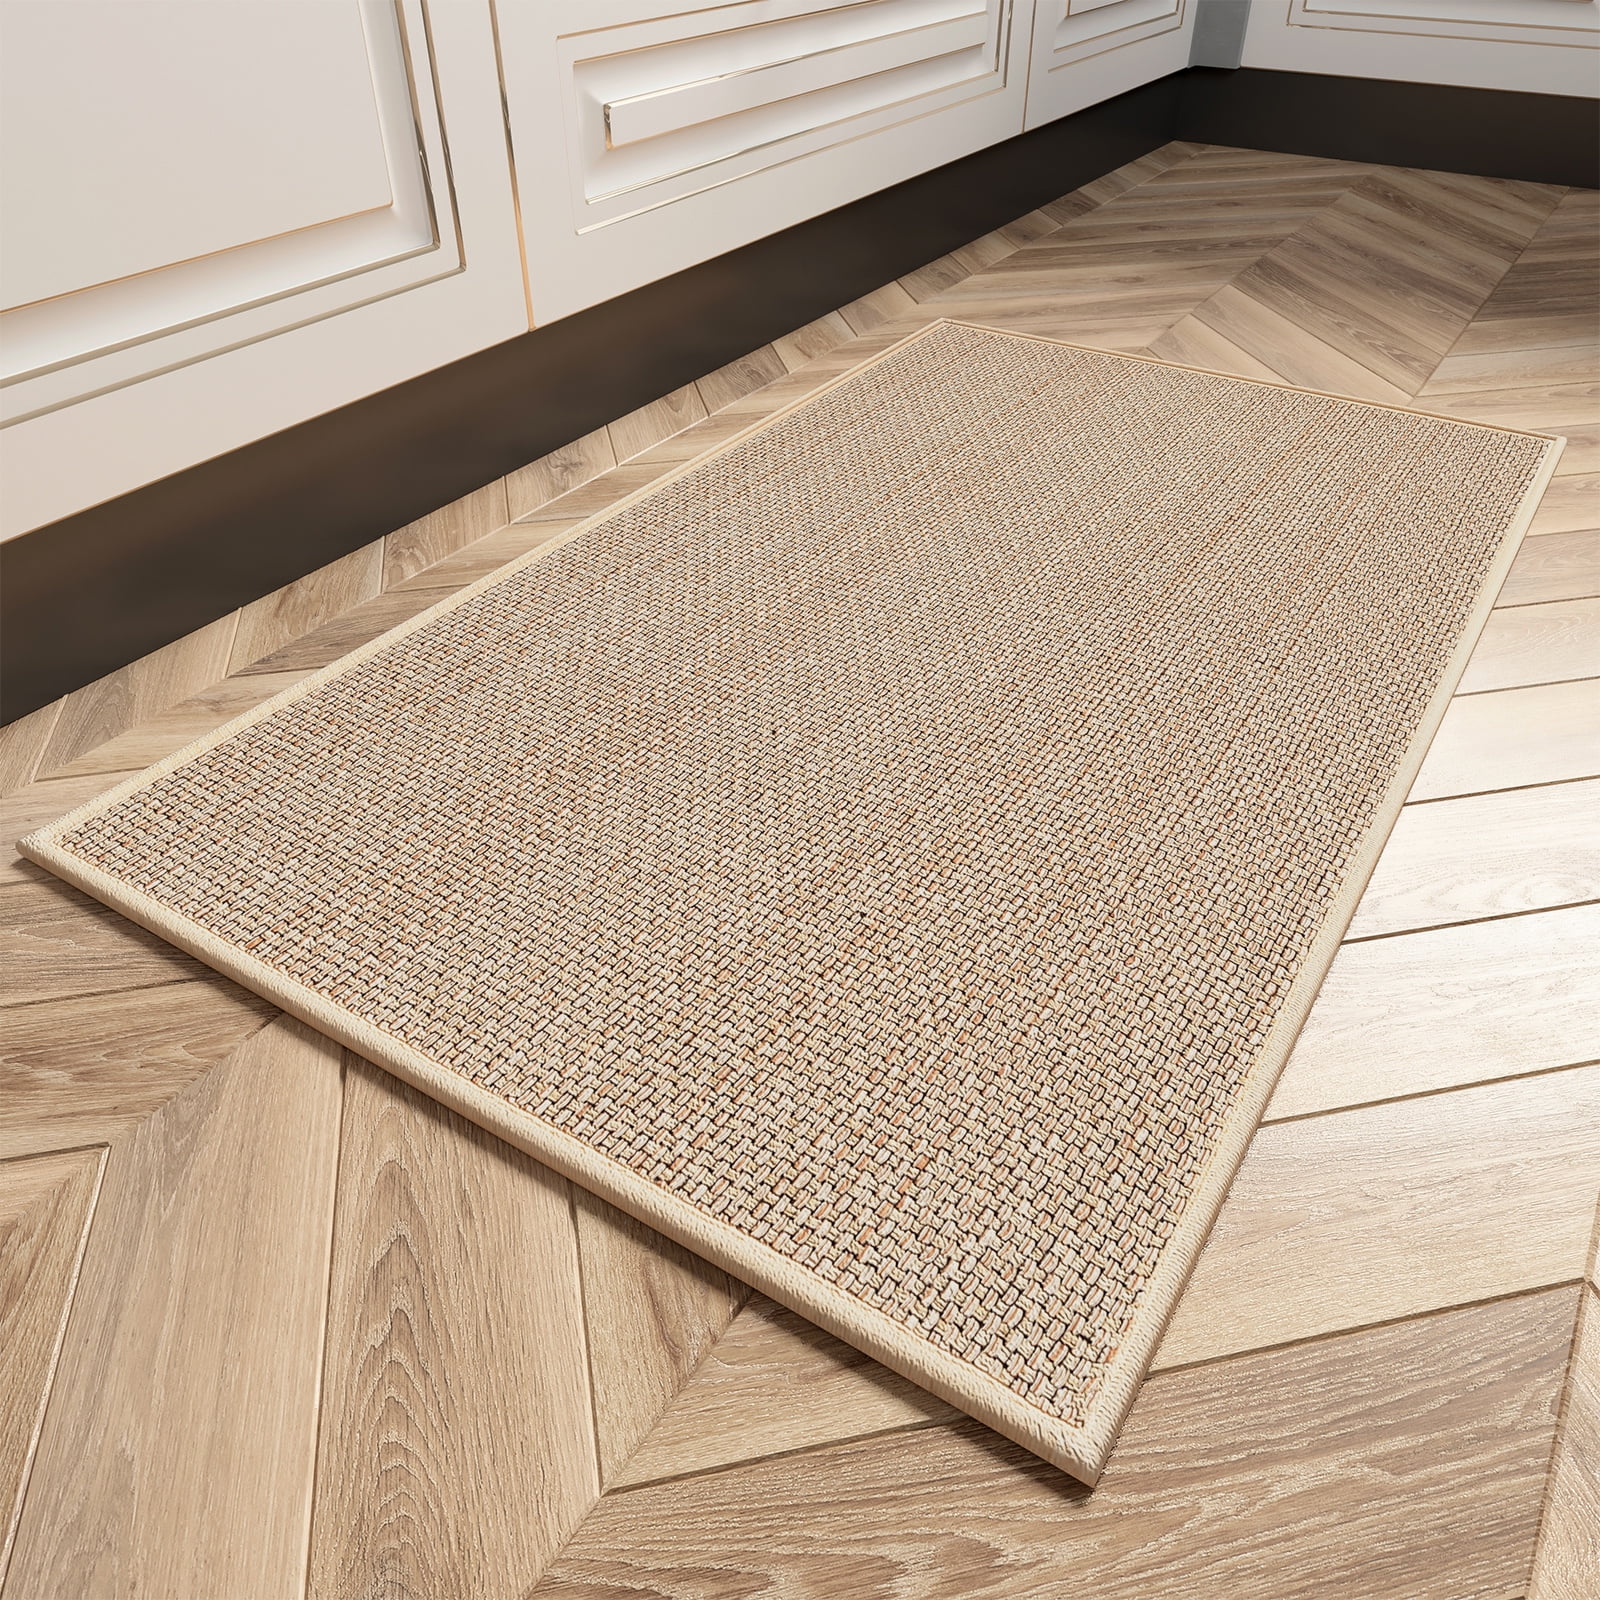 COSY HOMEER Long Kitchen Floor Mats for in Front of Sink Super Absorbent  Kitchen Rugs and Mats 24x79 Non-Skid Kitchen Mat Standing Mat